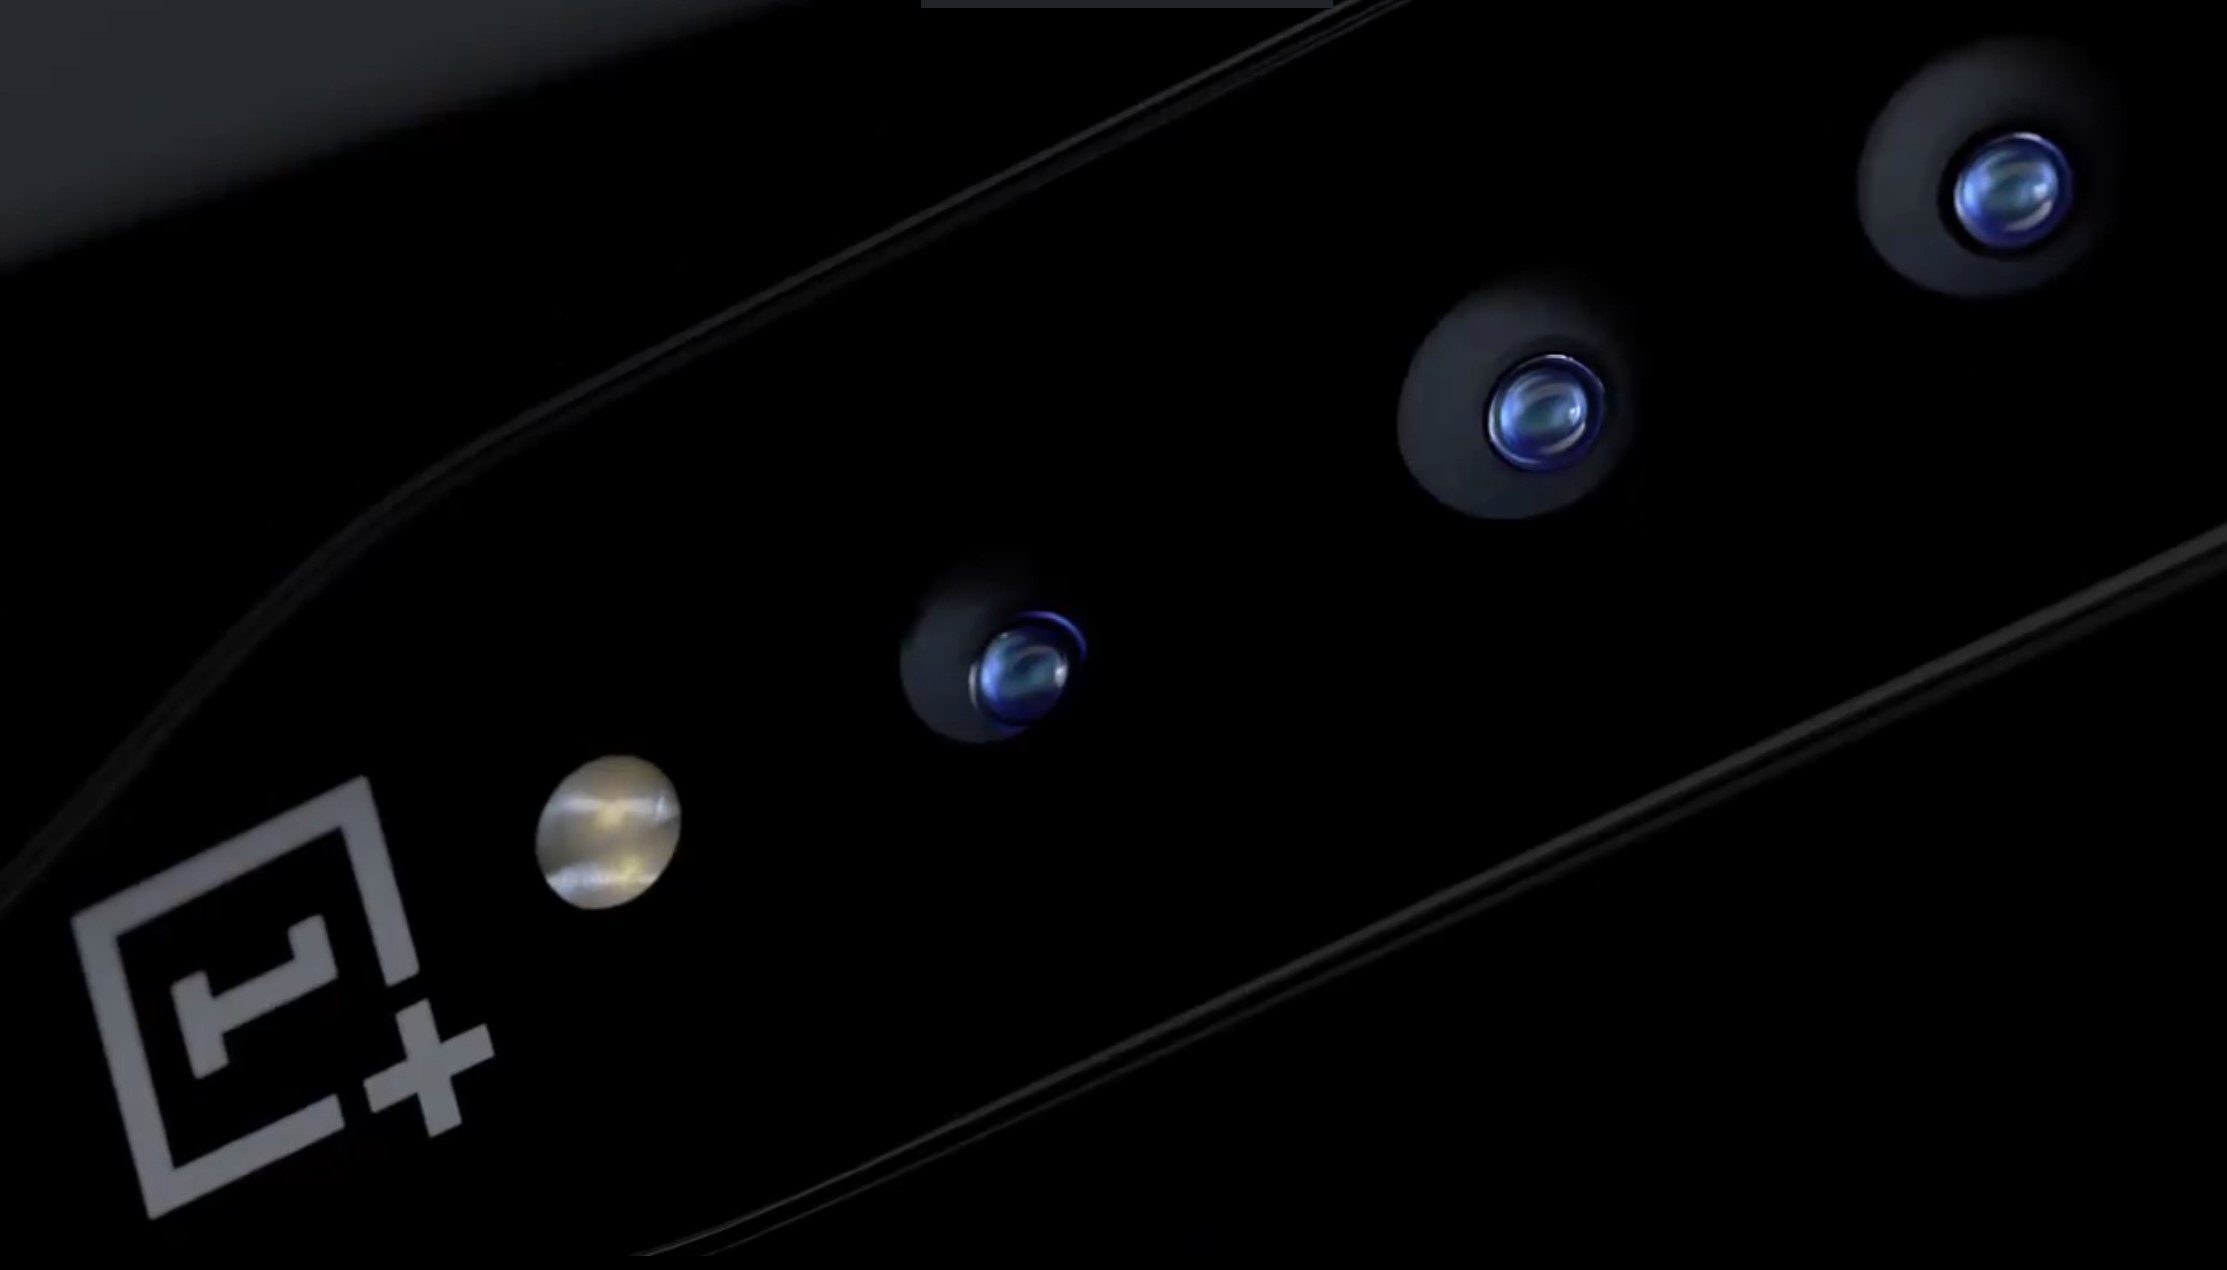 OnePlus’ ConceptOne smartphone teaser suggests groundbreaking “invisible camera” and color-shifting glass technology